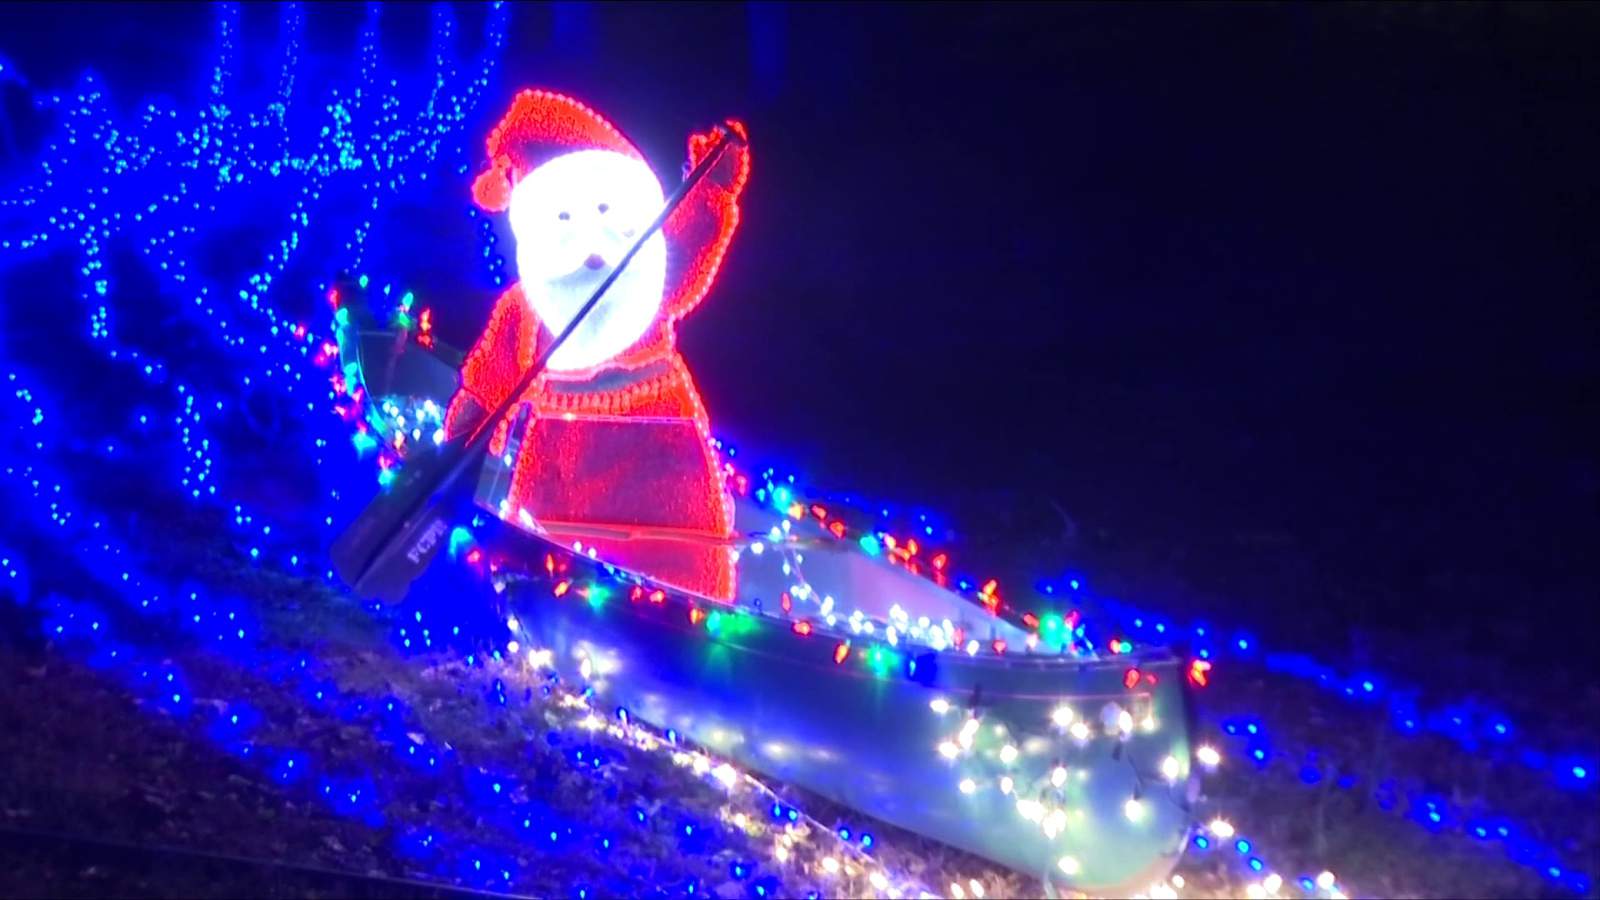 Franklin County shines bright with new drive-thru Christmas lights experience